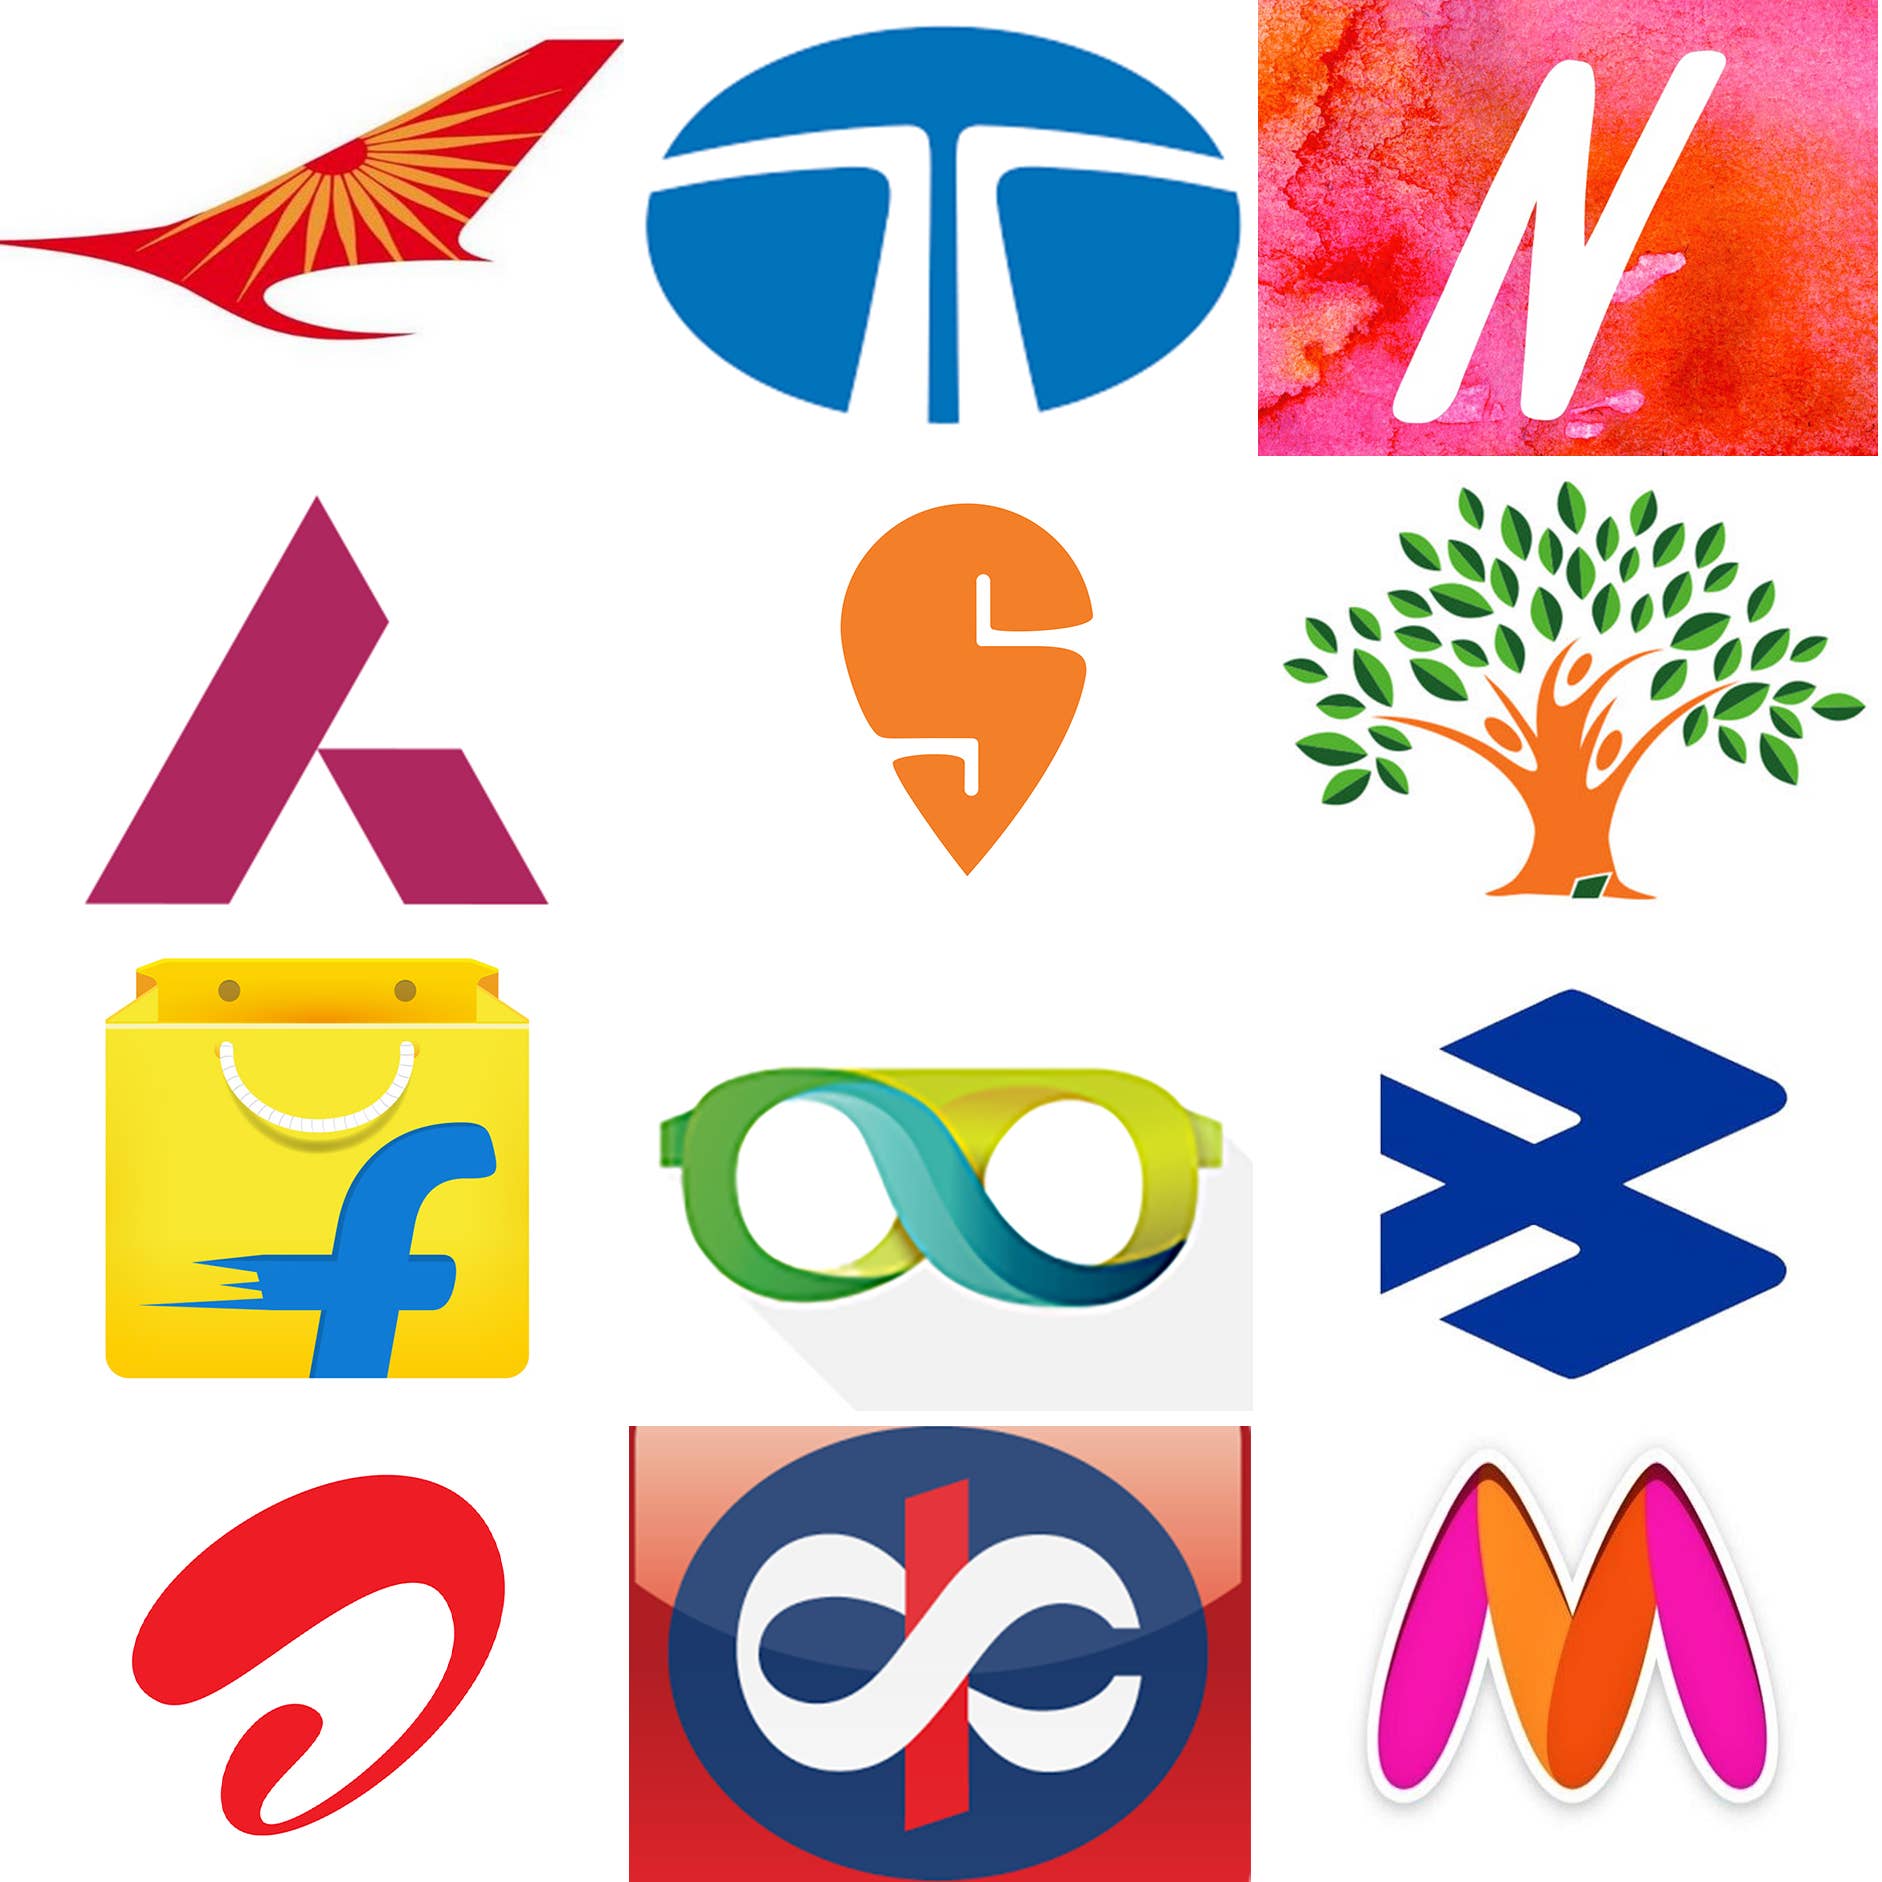 Brands and Logos Quiz 